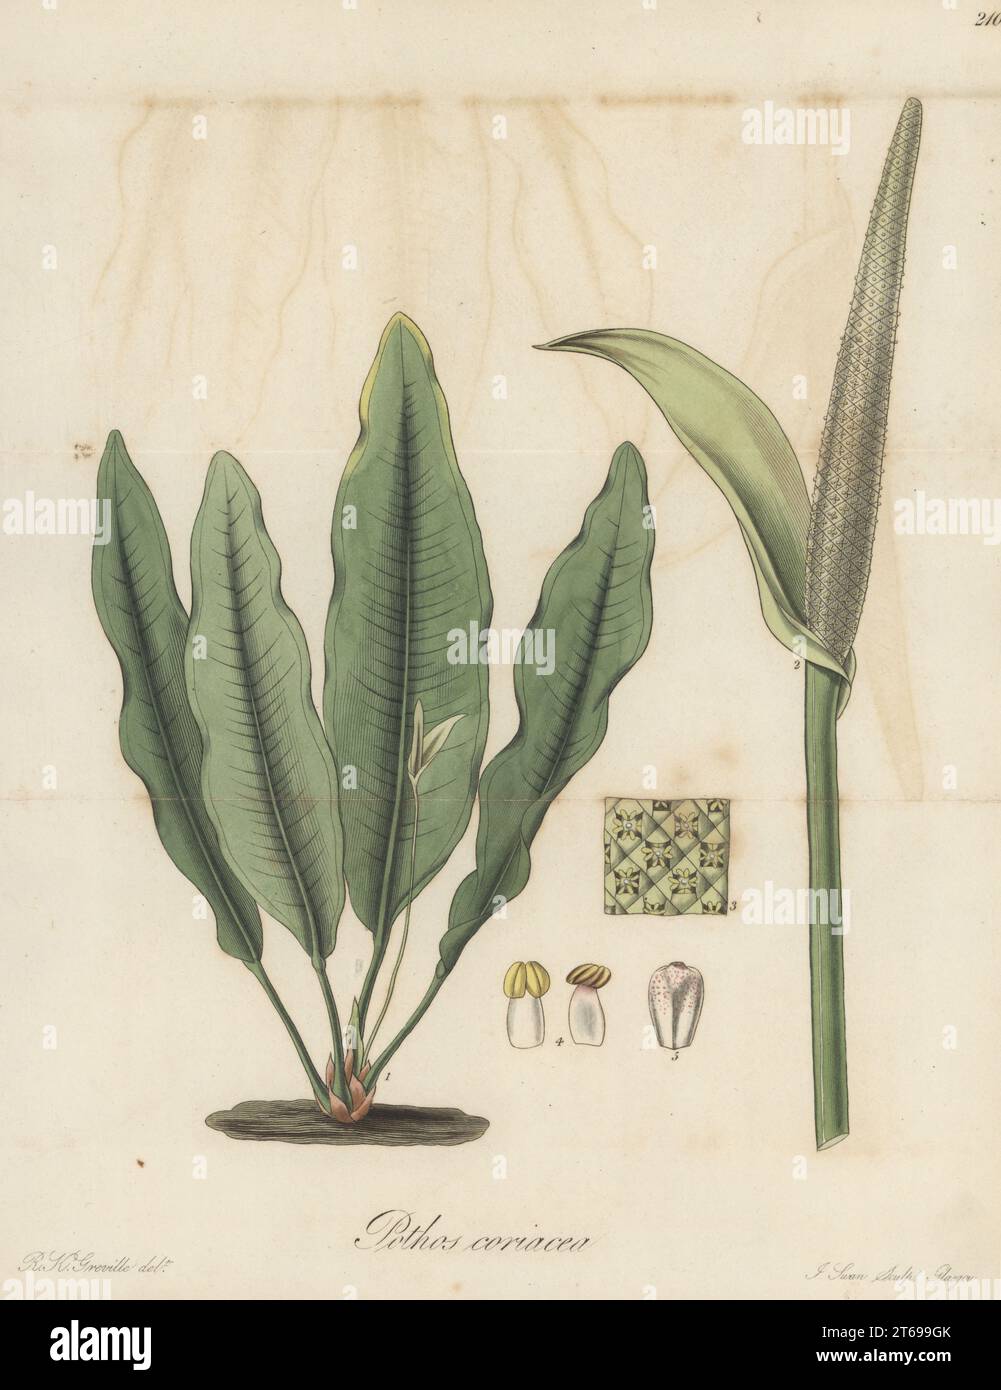 Bird's nest anthurium, Anthurium coriaceum. Native to Brazil, plant brought by Captain Robert Graham of H. M. Packet-Service from Rio de Janeiro in 1824. Coriaceous pothos, Pothos coriaceus. Handcoloured copperplate engraving by Joseph Swan after a botanical illustration by Robert Kaye Greville from William Jackson Hooker's Exotic Flora, William Blackwood, Edinburgh, 1827. Stock Photo